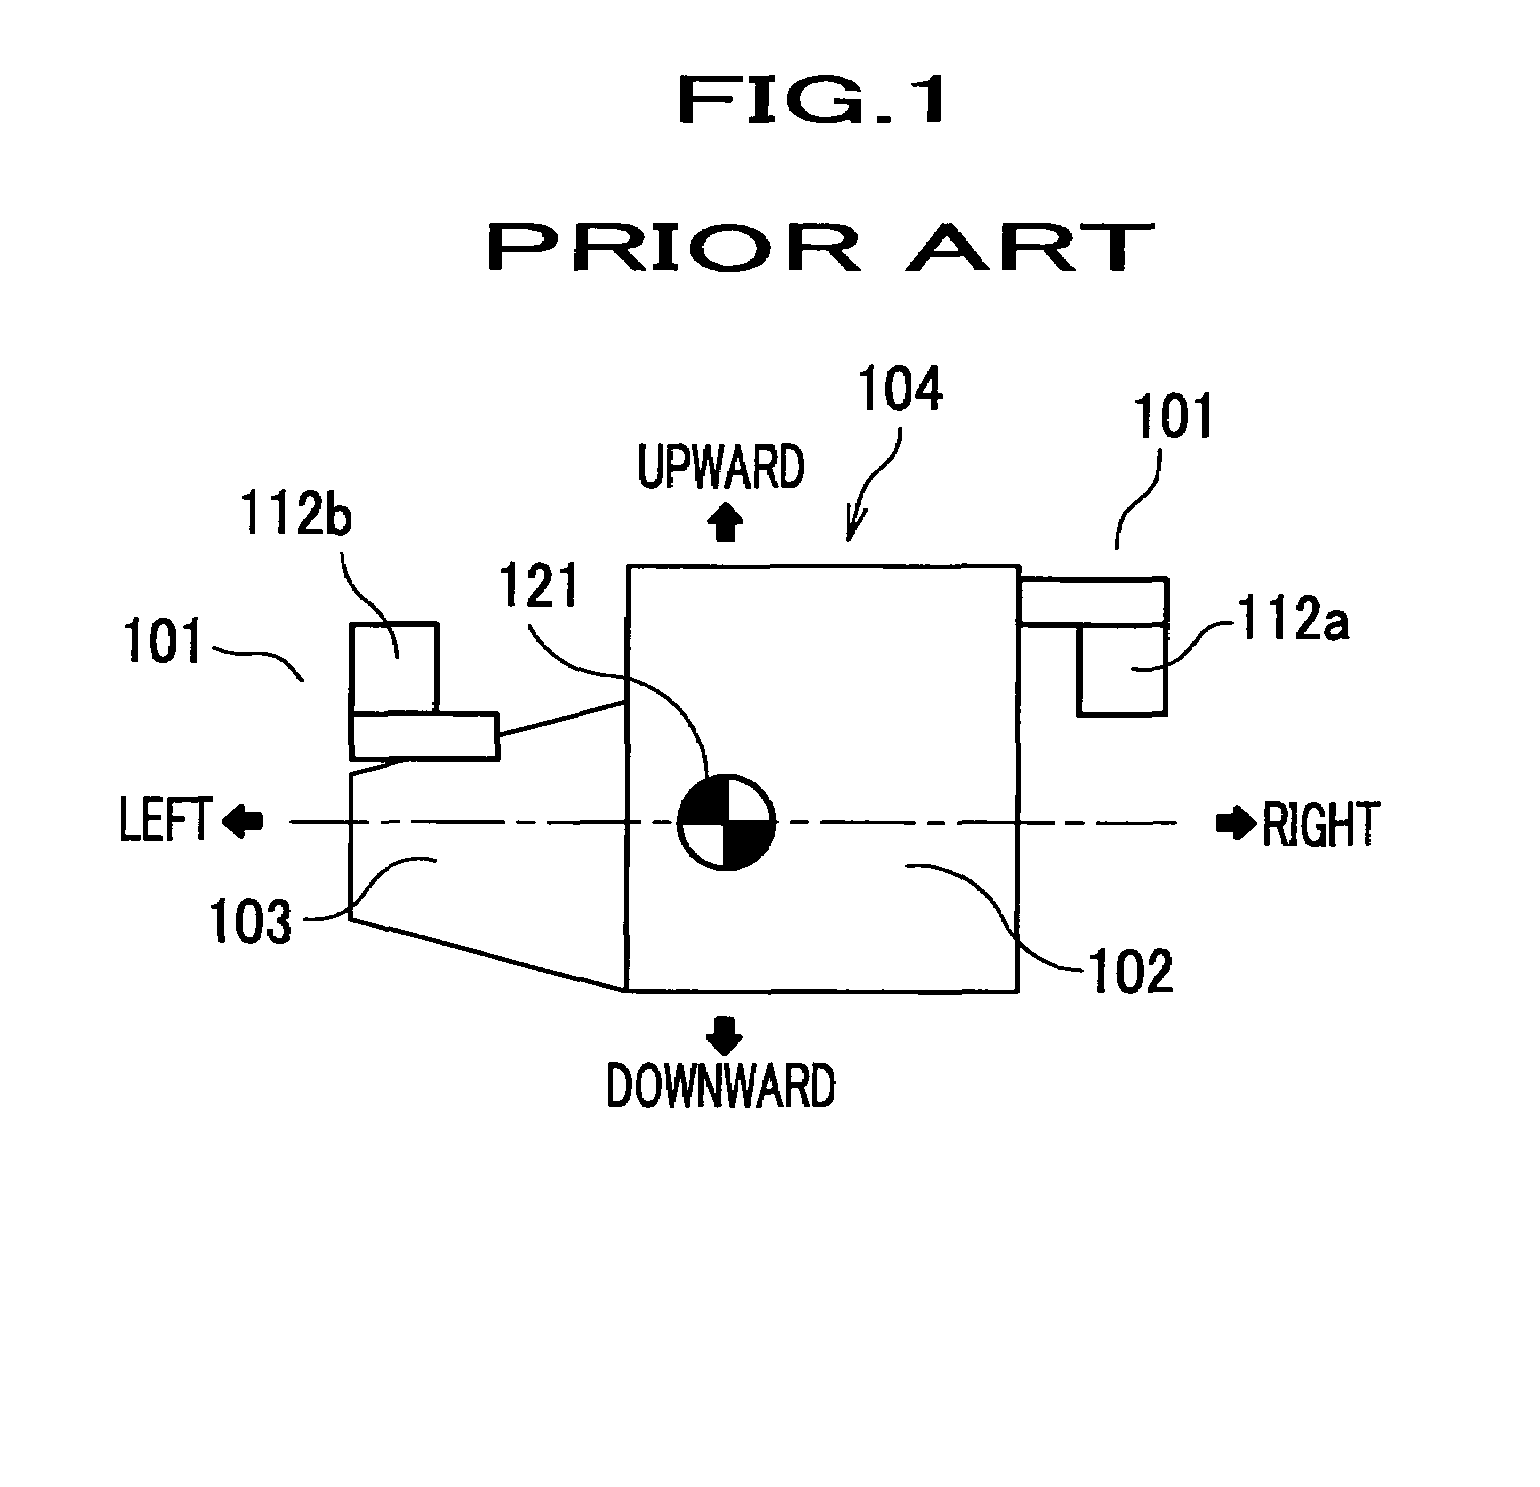 Vehicle power source supporting structure